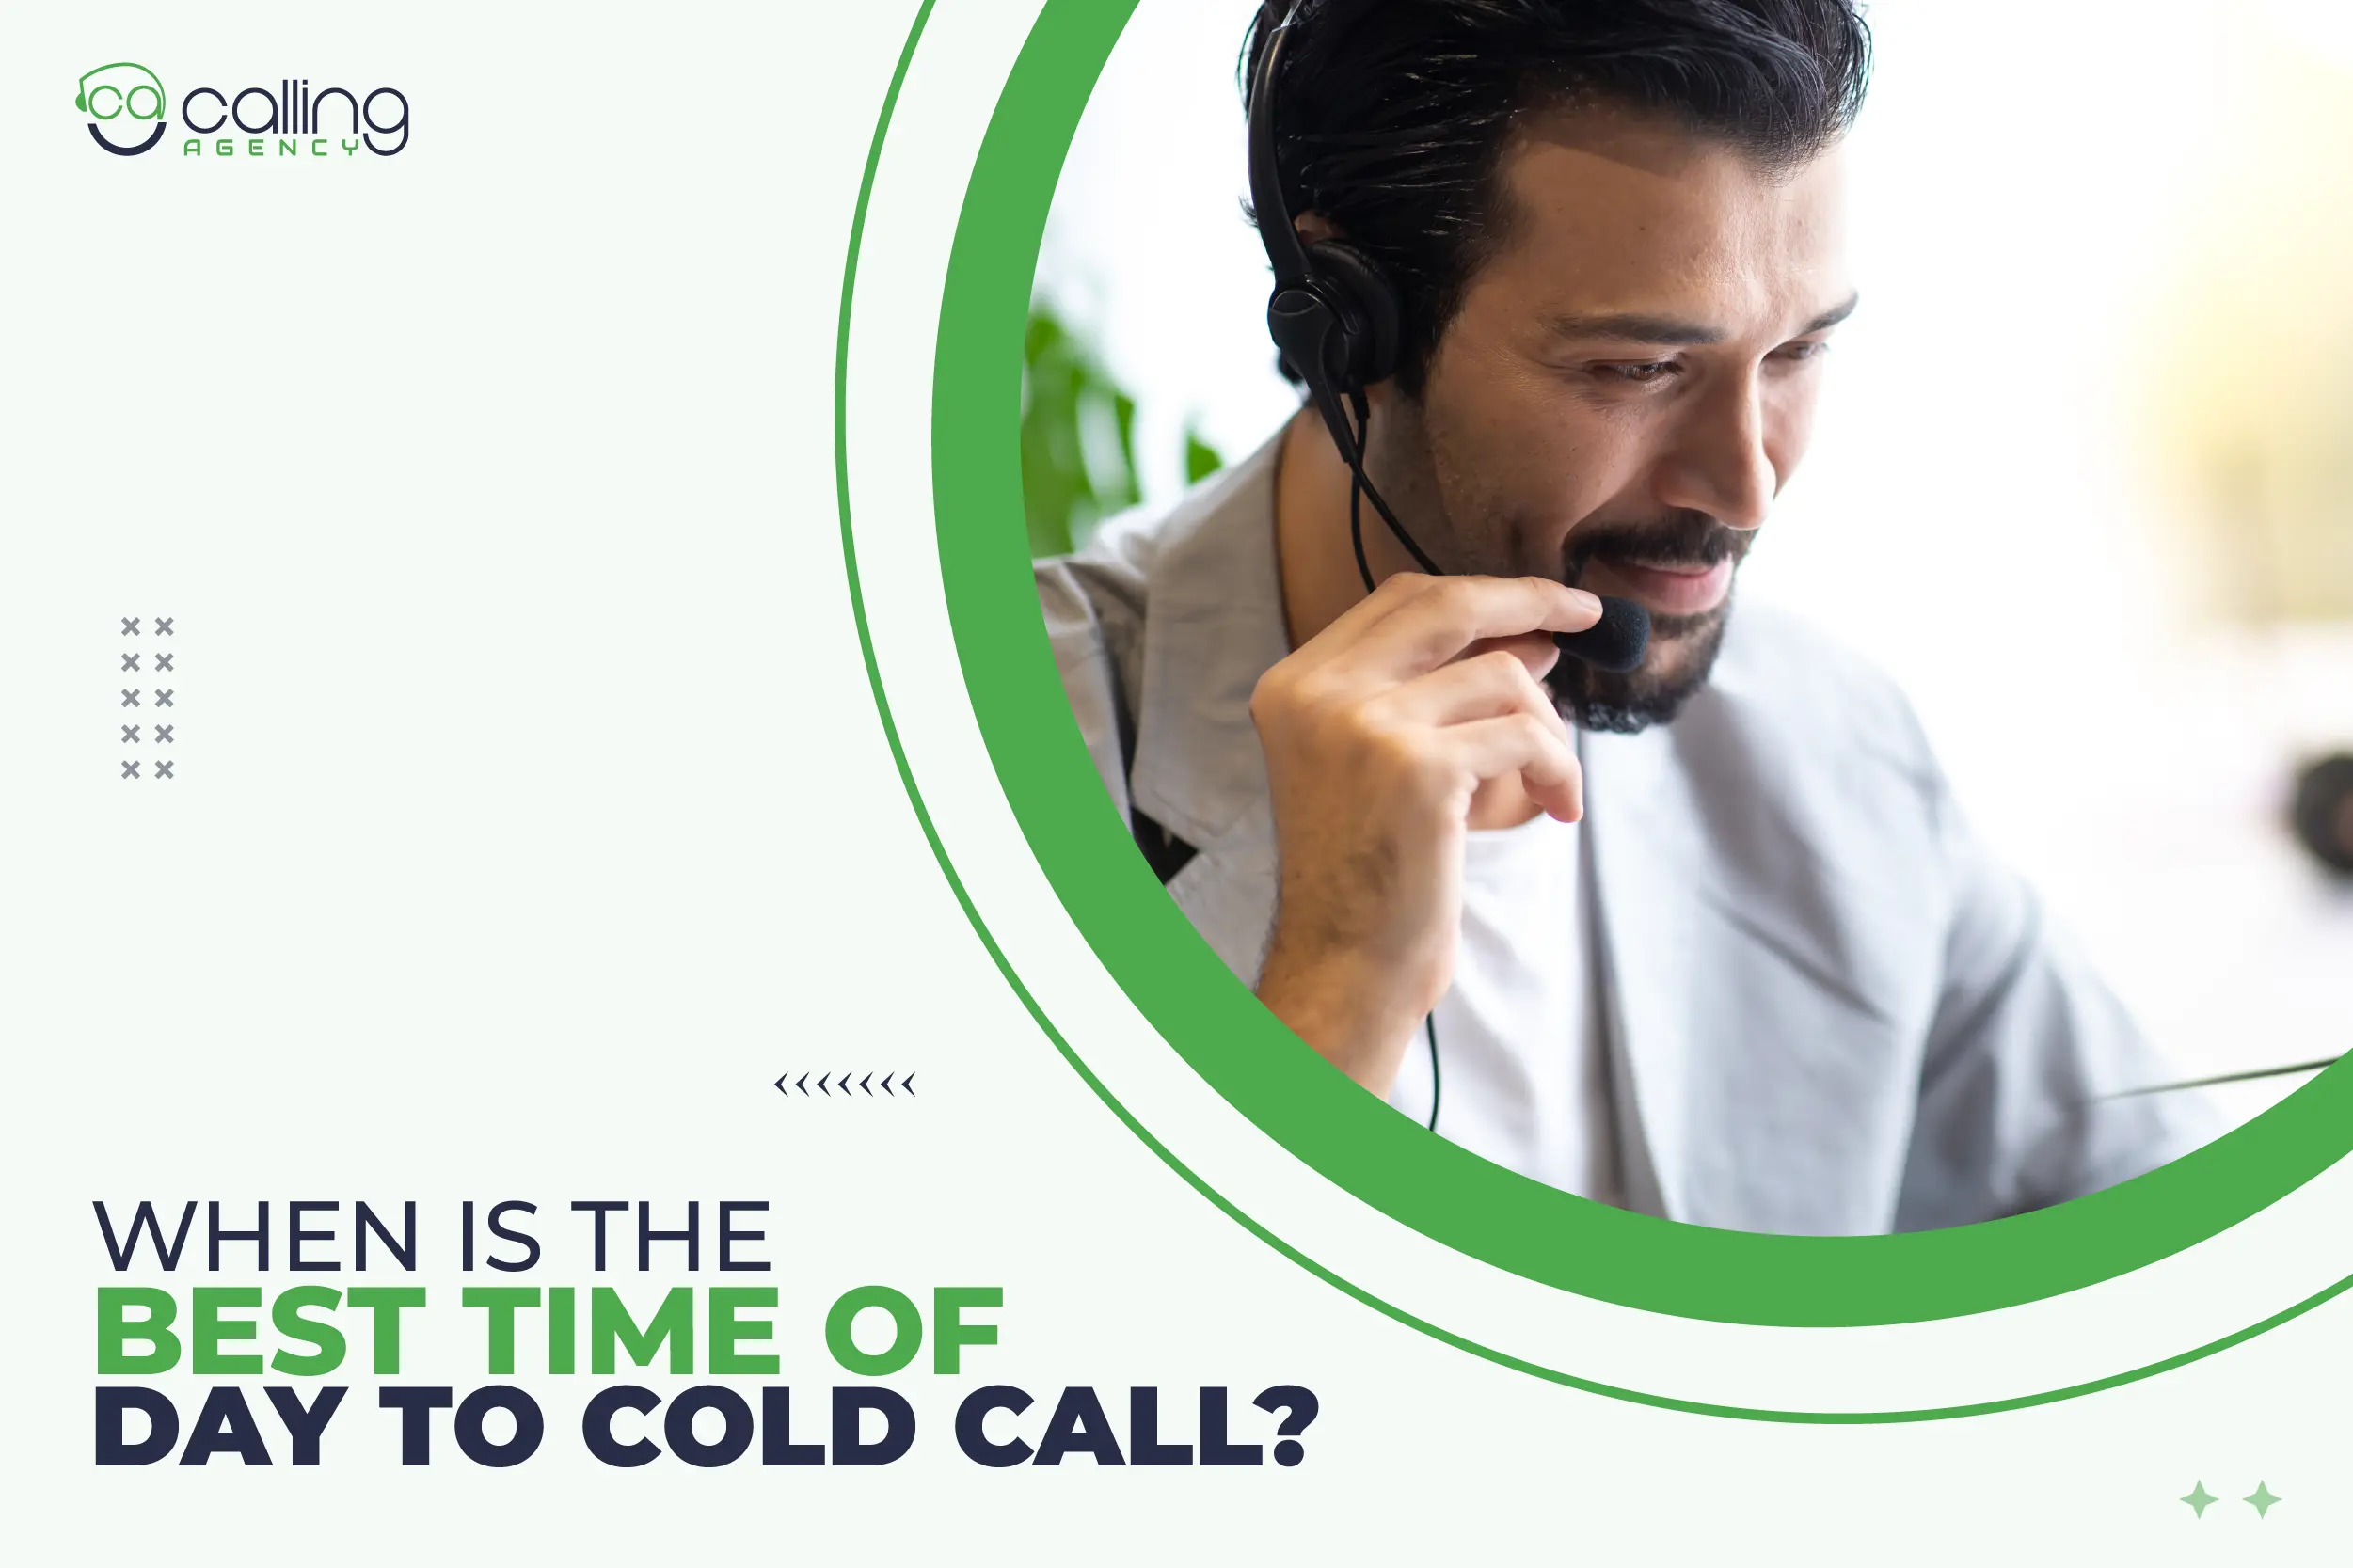 When Is The Best Time Of Day To Cold Call?